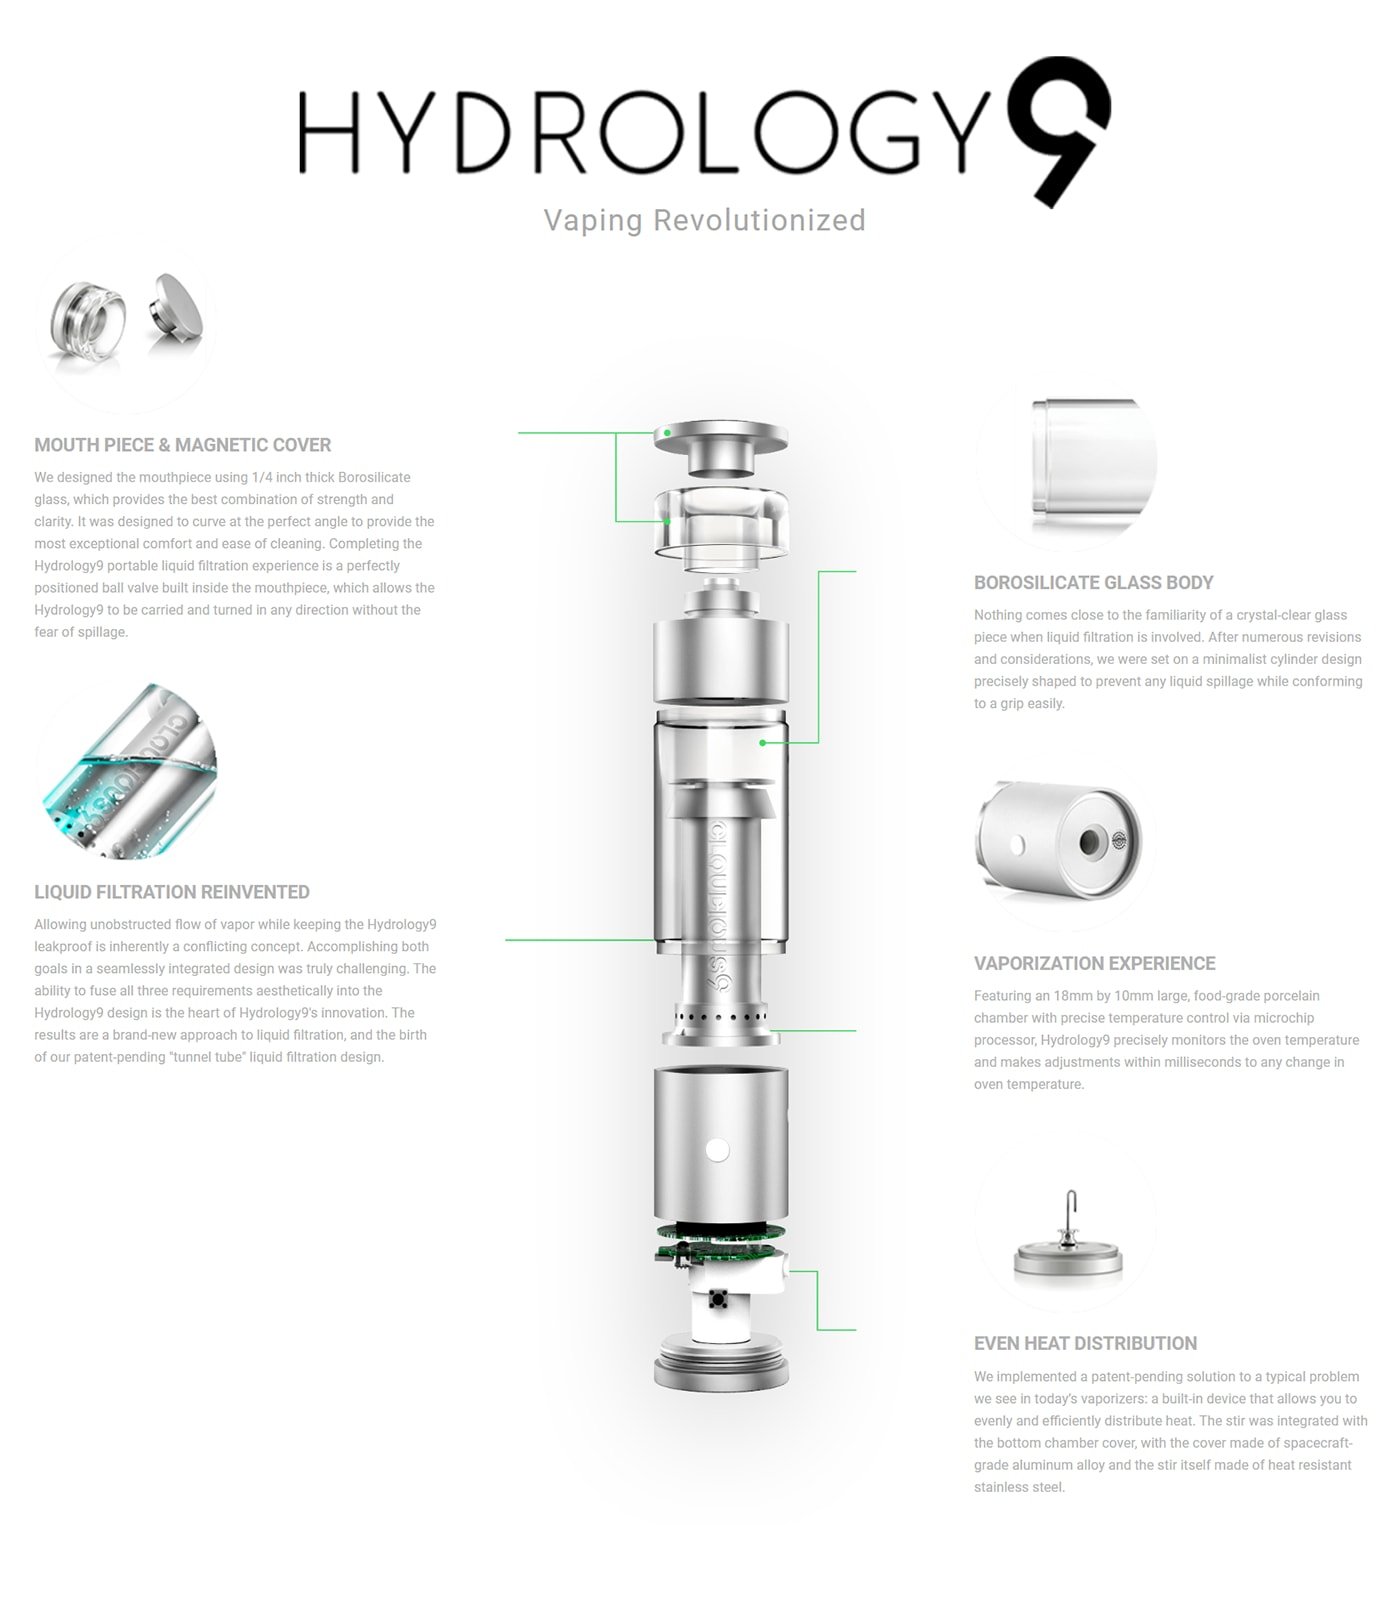 Cloudious Hydrology9 dry herb vaporizer with integrated water cooling system